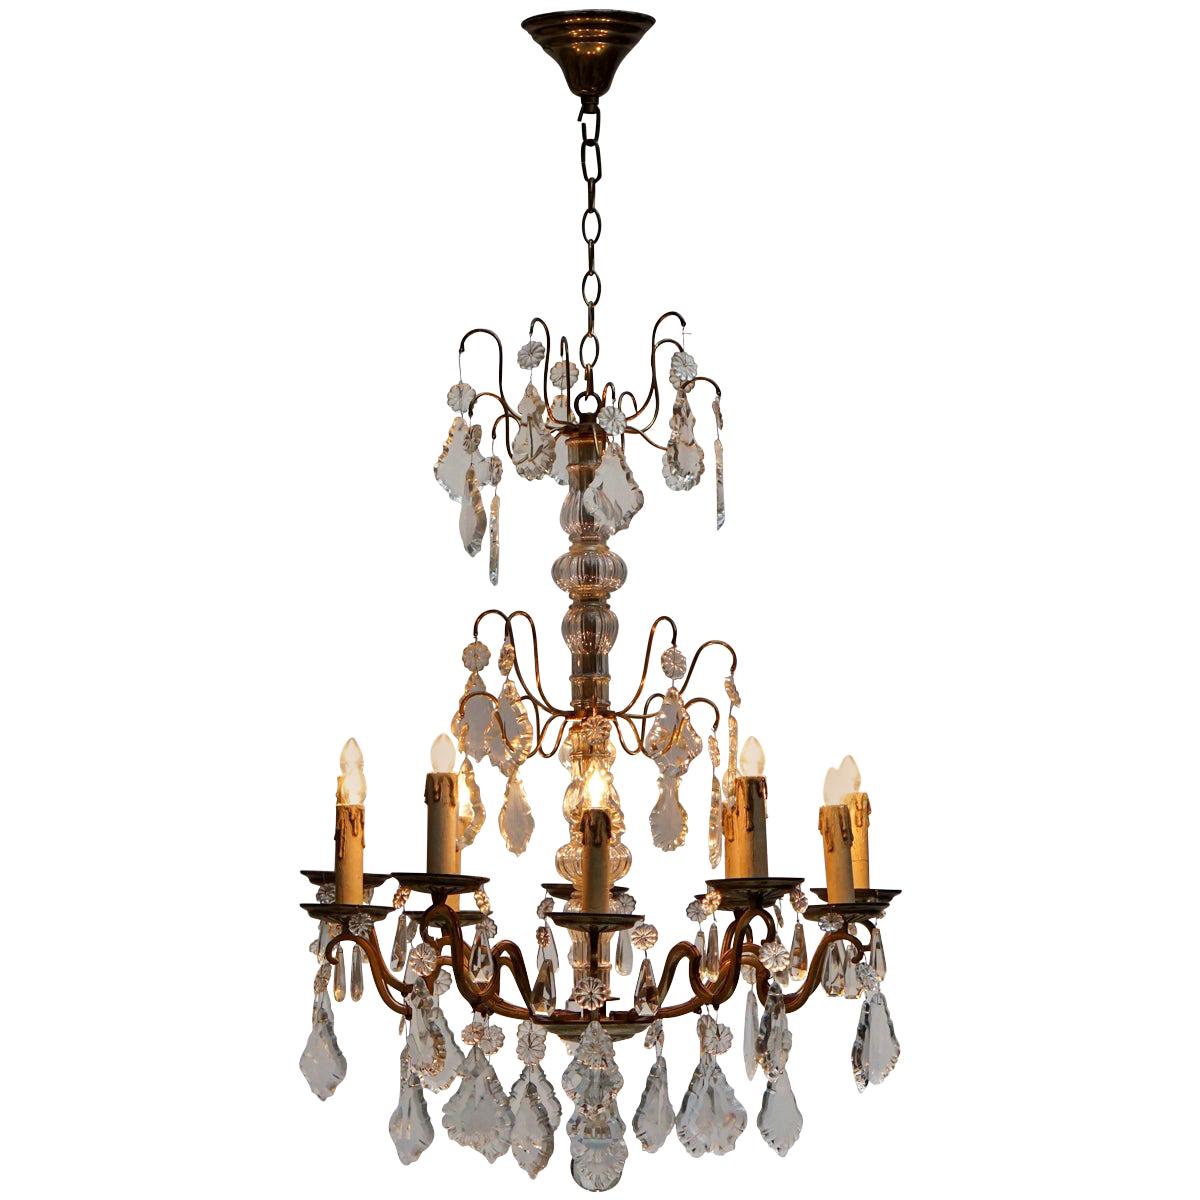 Brass and Cristal Glass Chandelier